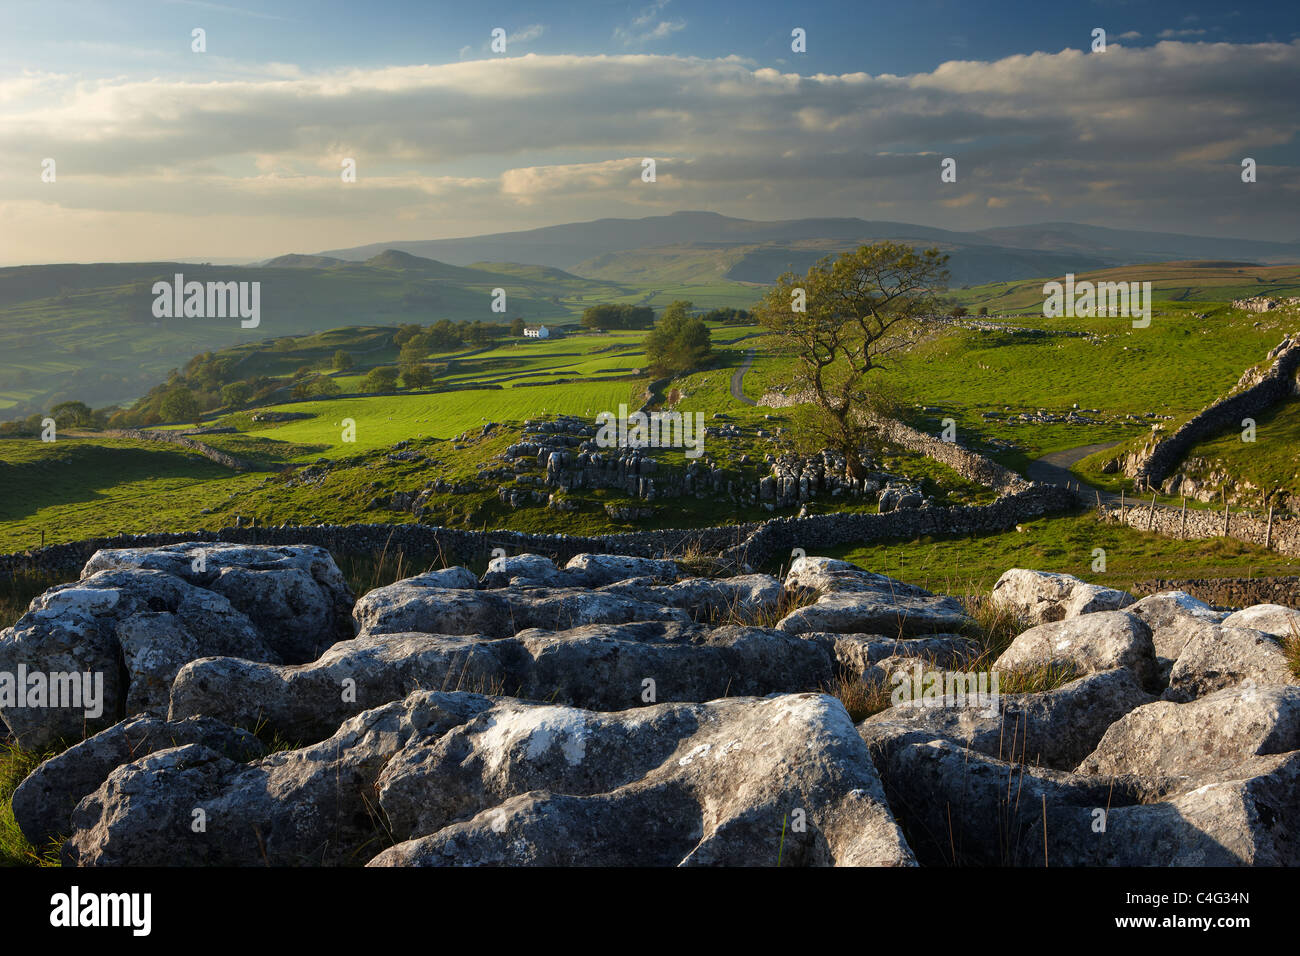 Pierres Winskill, Ribblesdale, Yorkshire Dales National Park, England, UK Banque D'Images